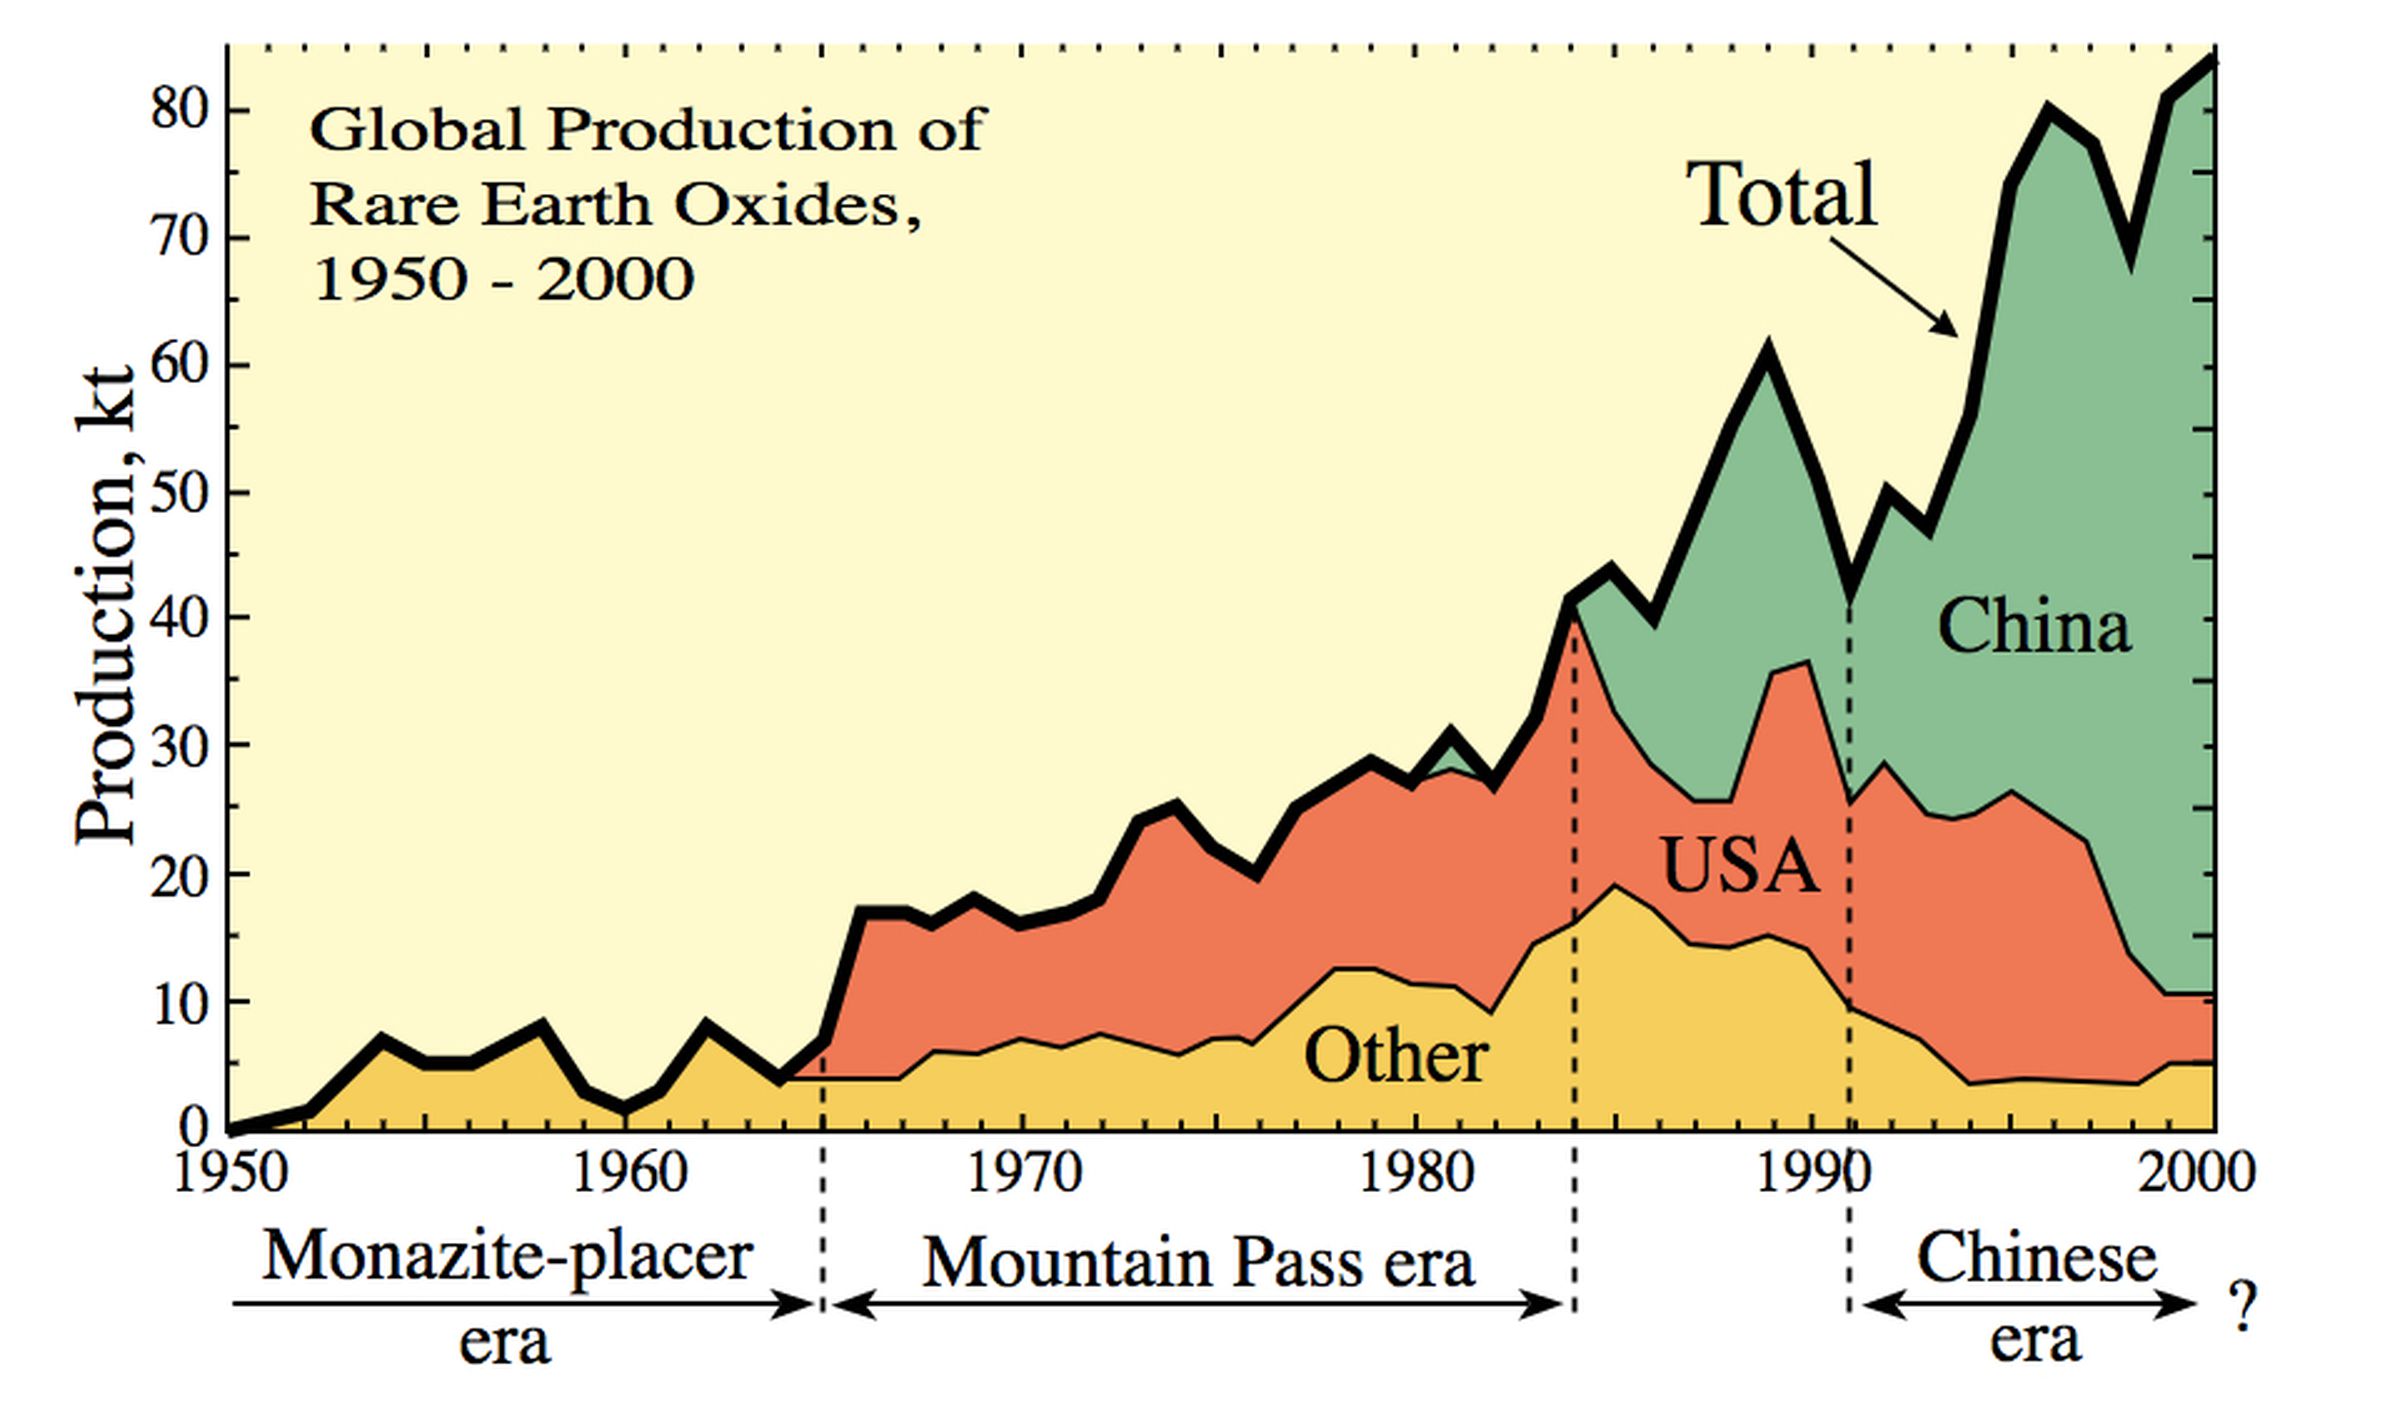 Global production of rare earth oxides from 1950 to 2000.